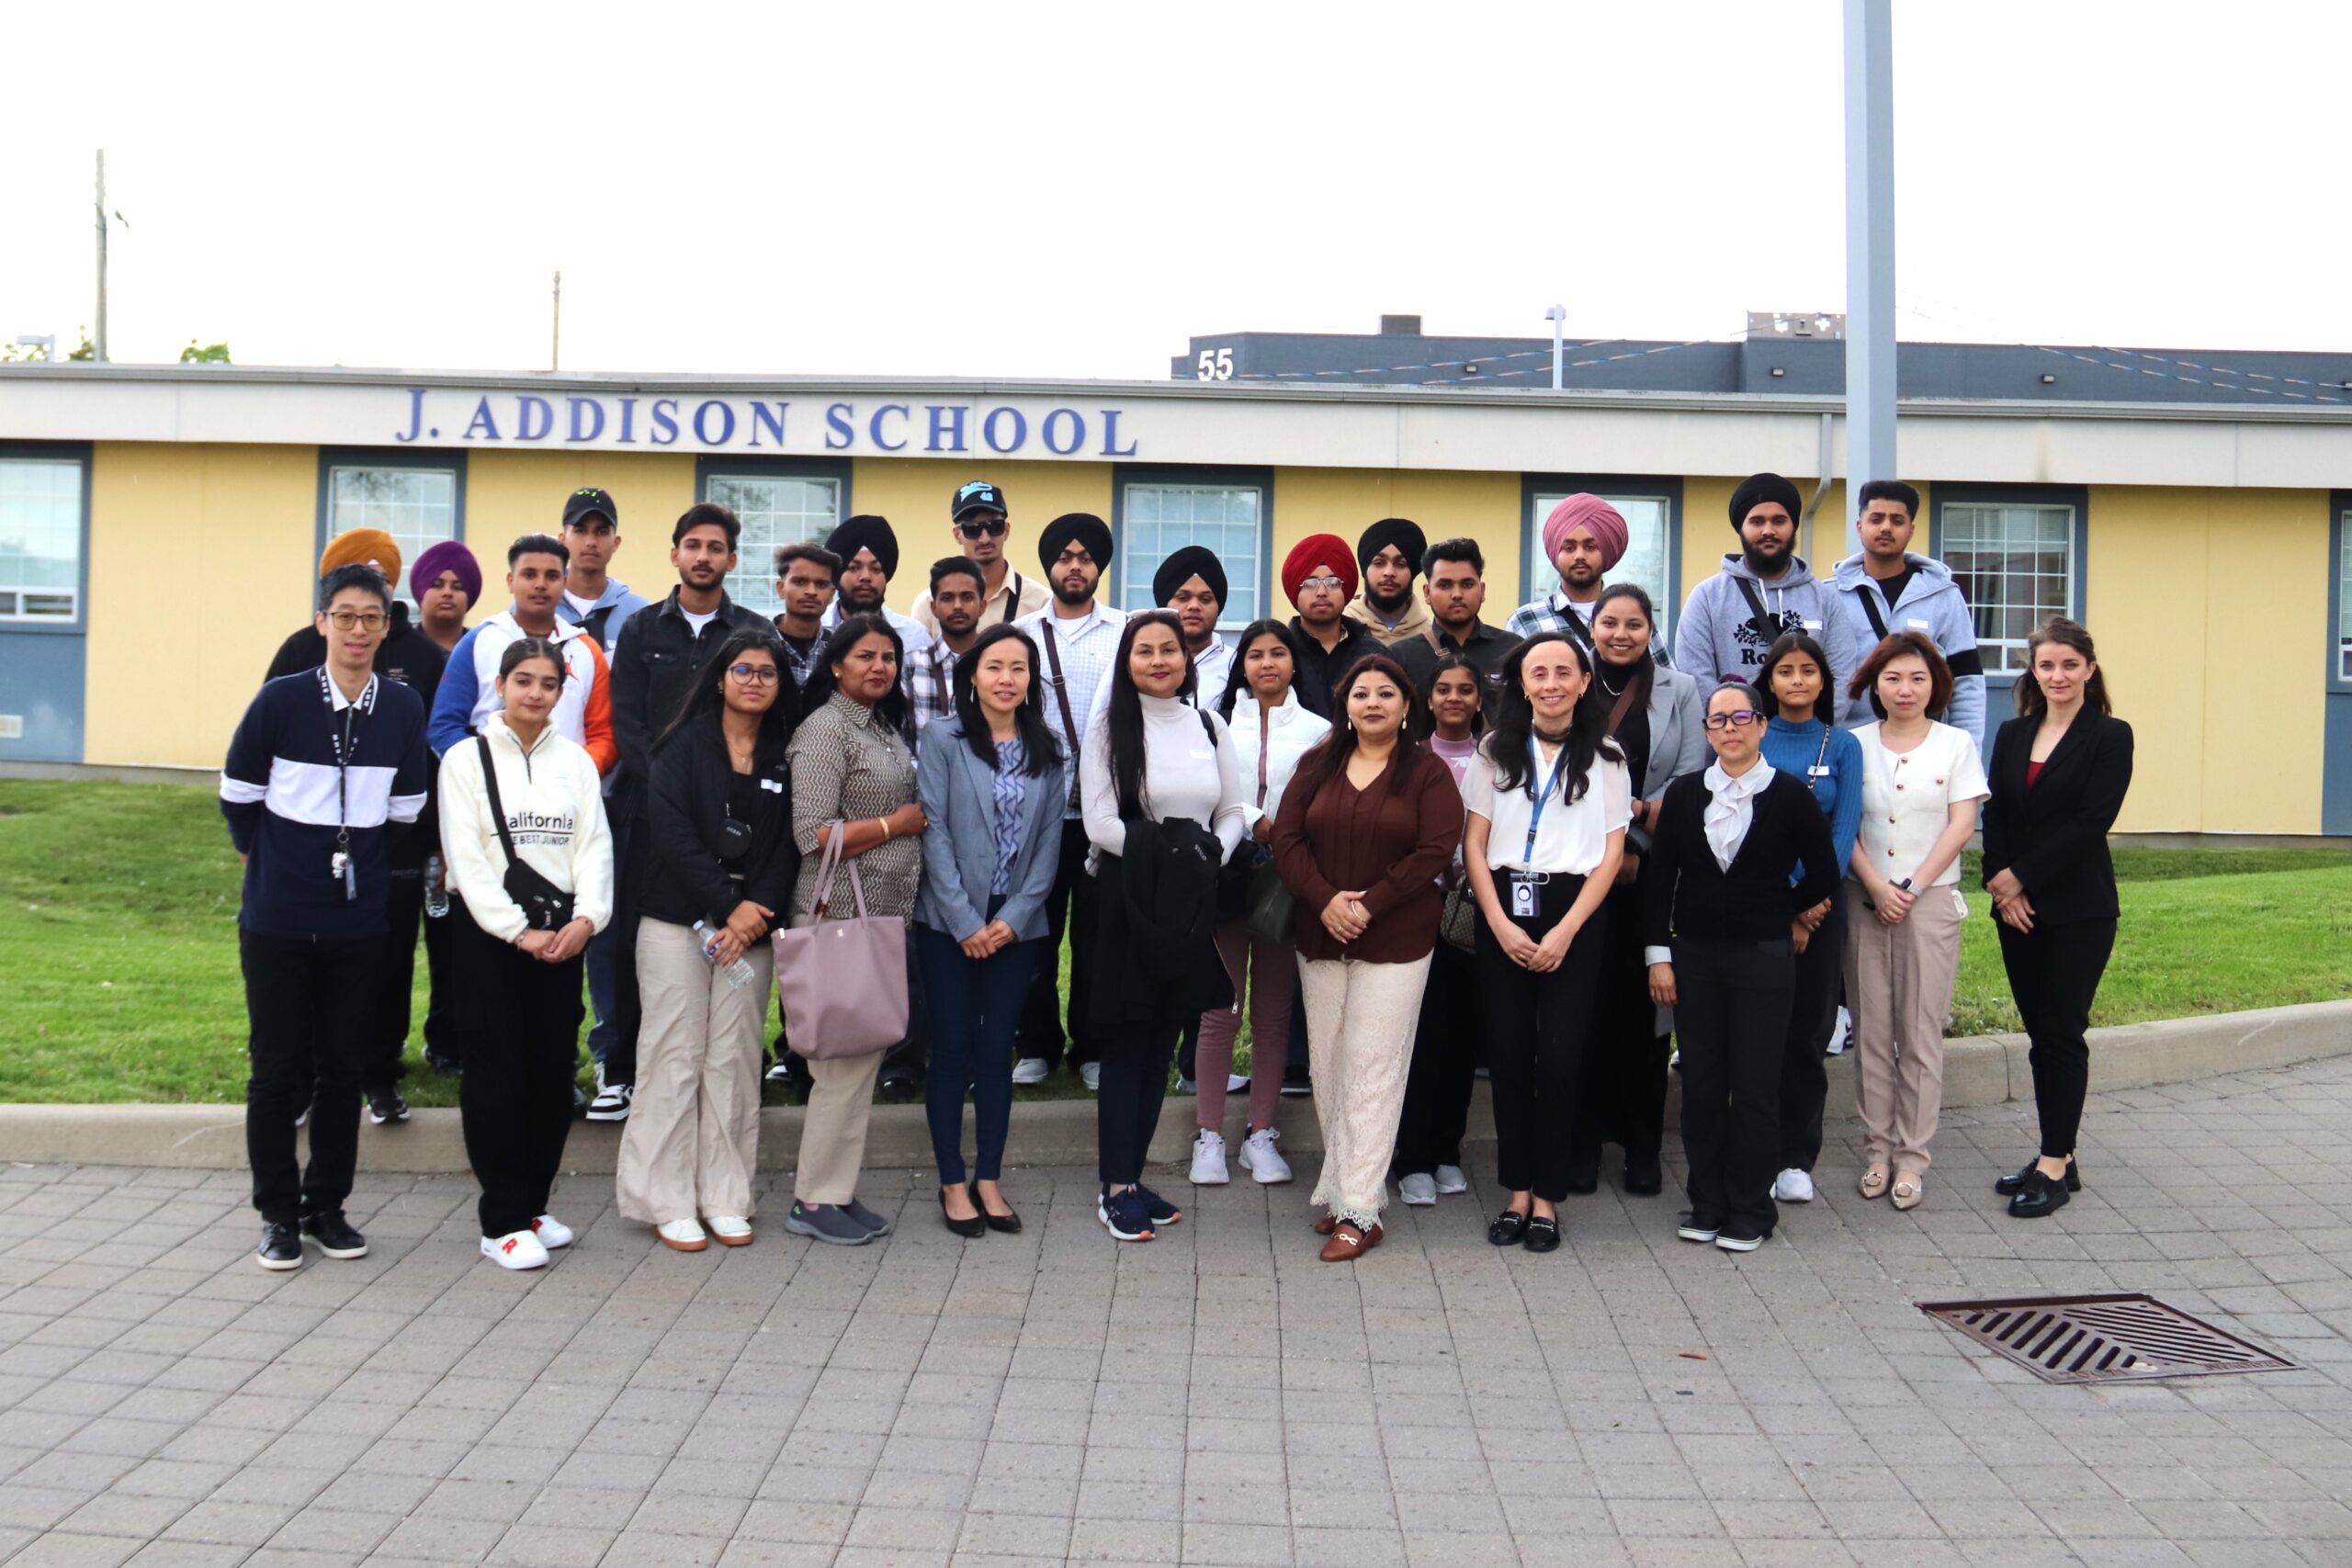 International Students learning experience at J. Addison School